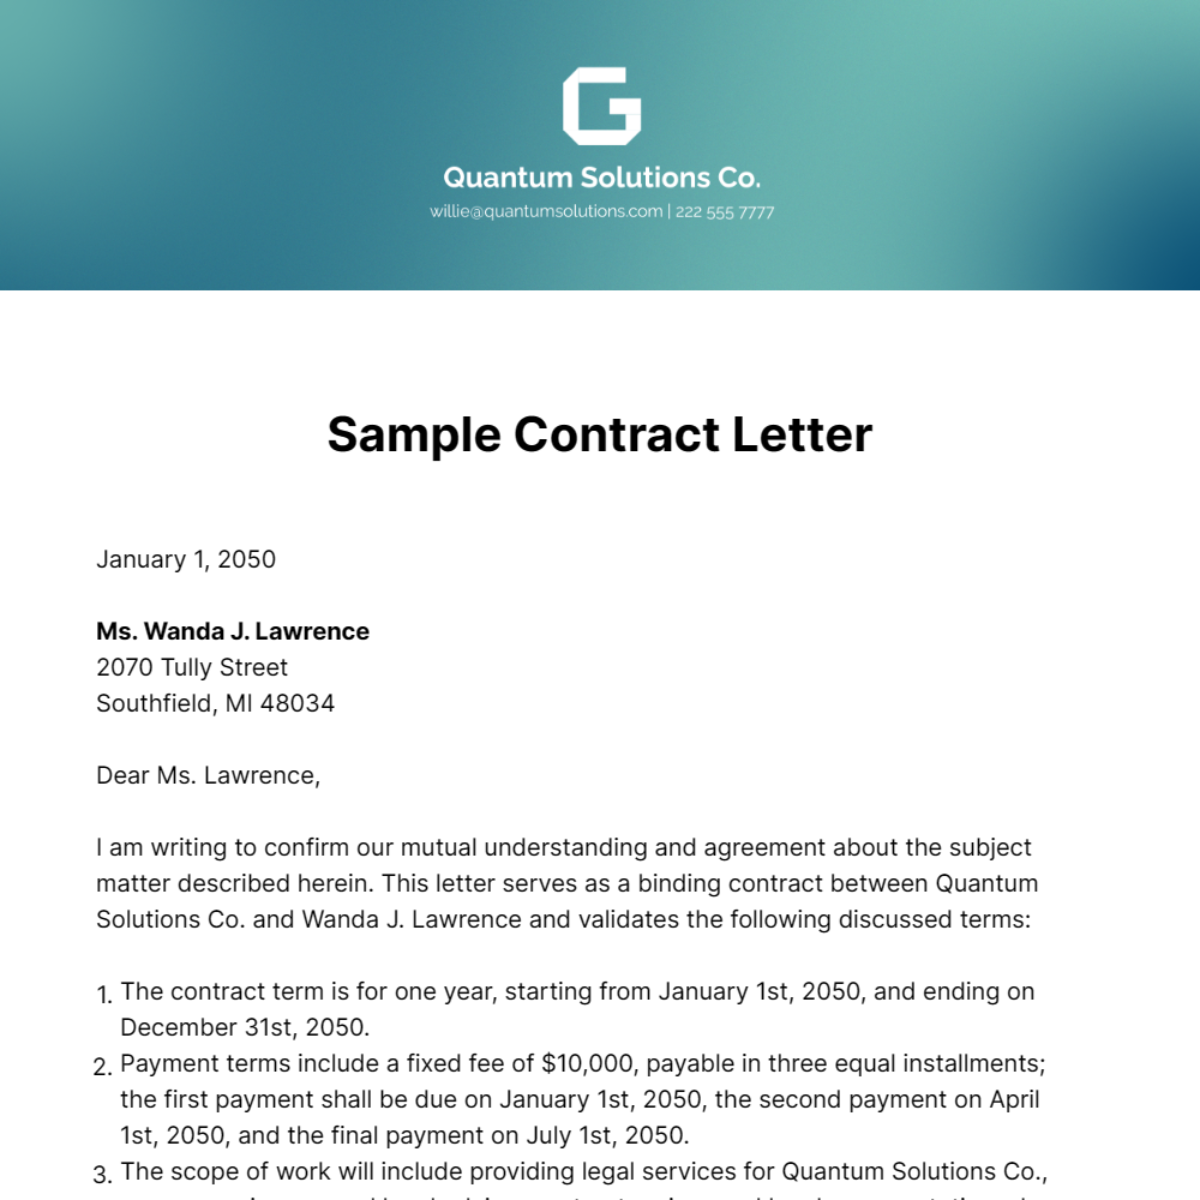 Sample Contract Letter Template